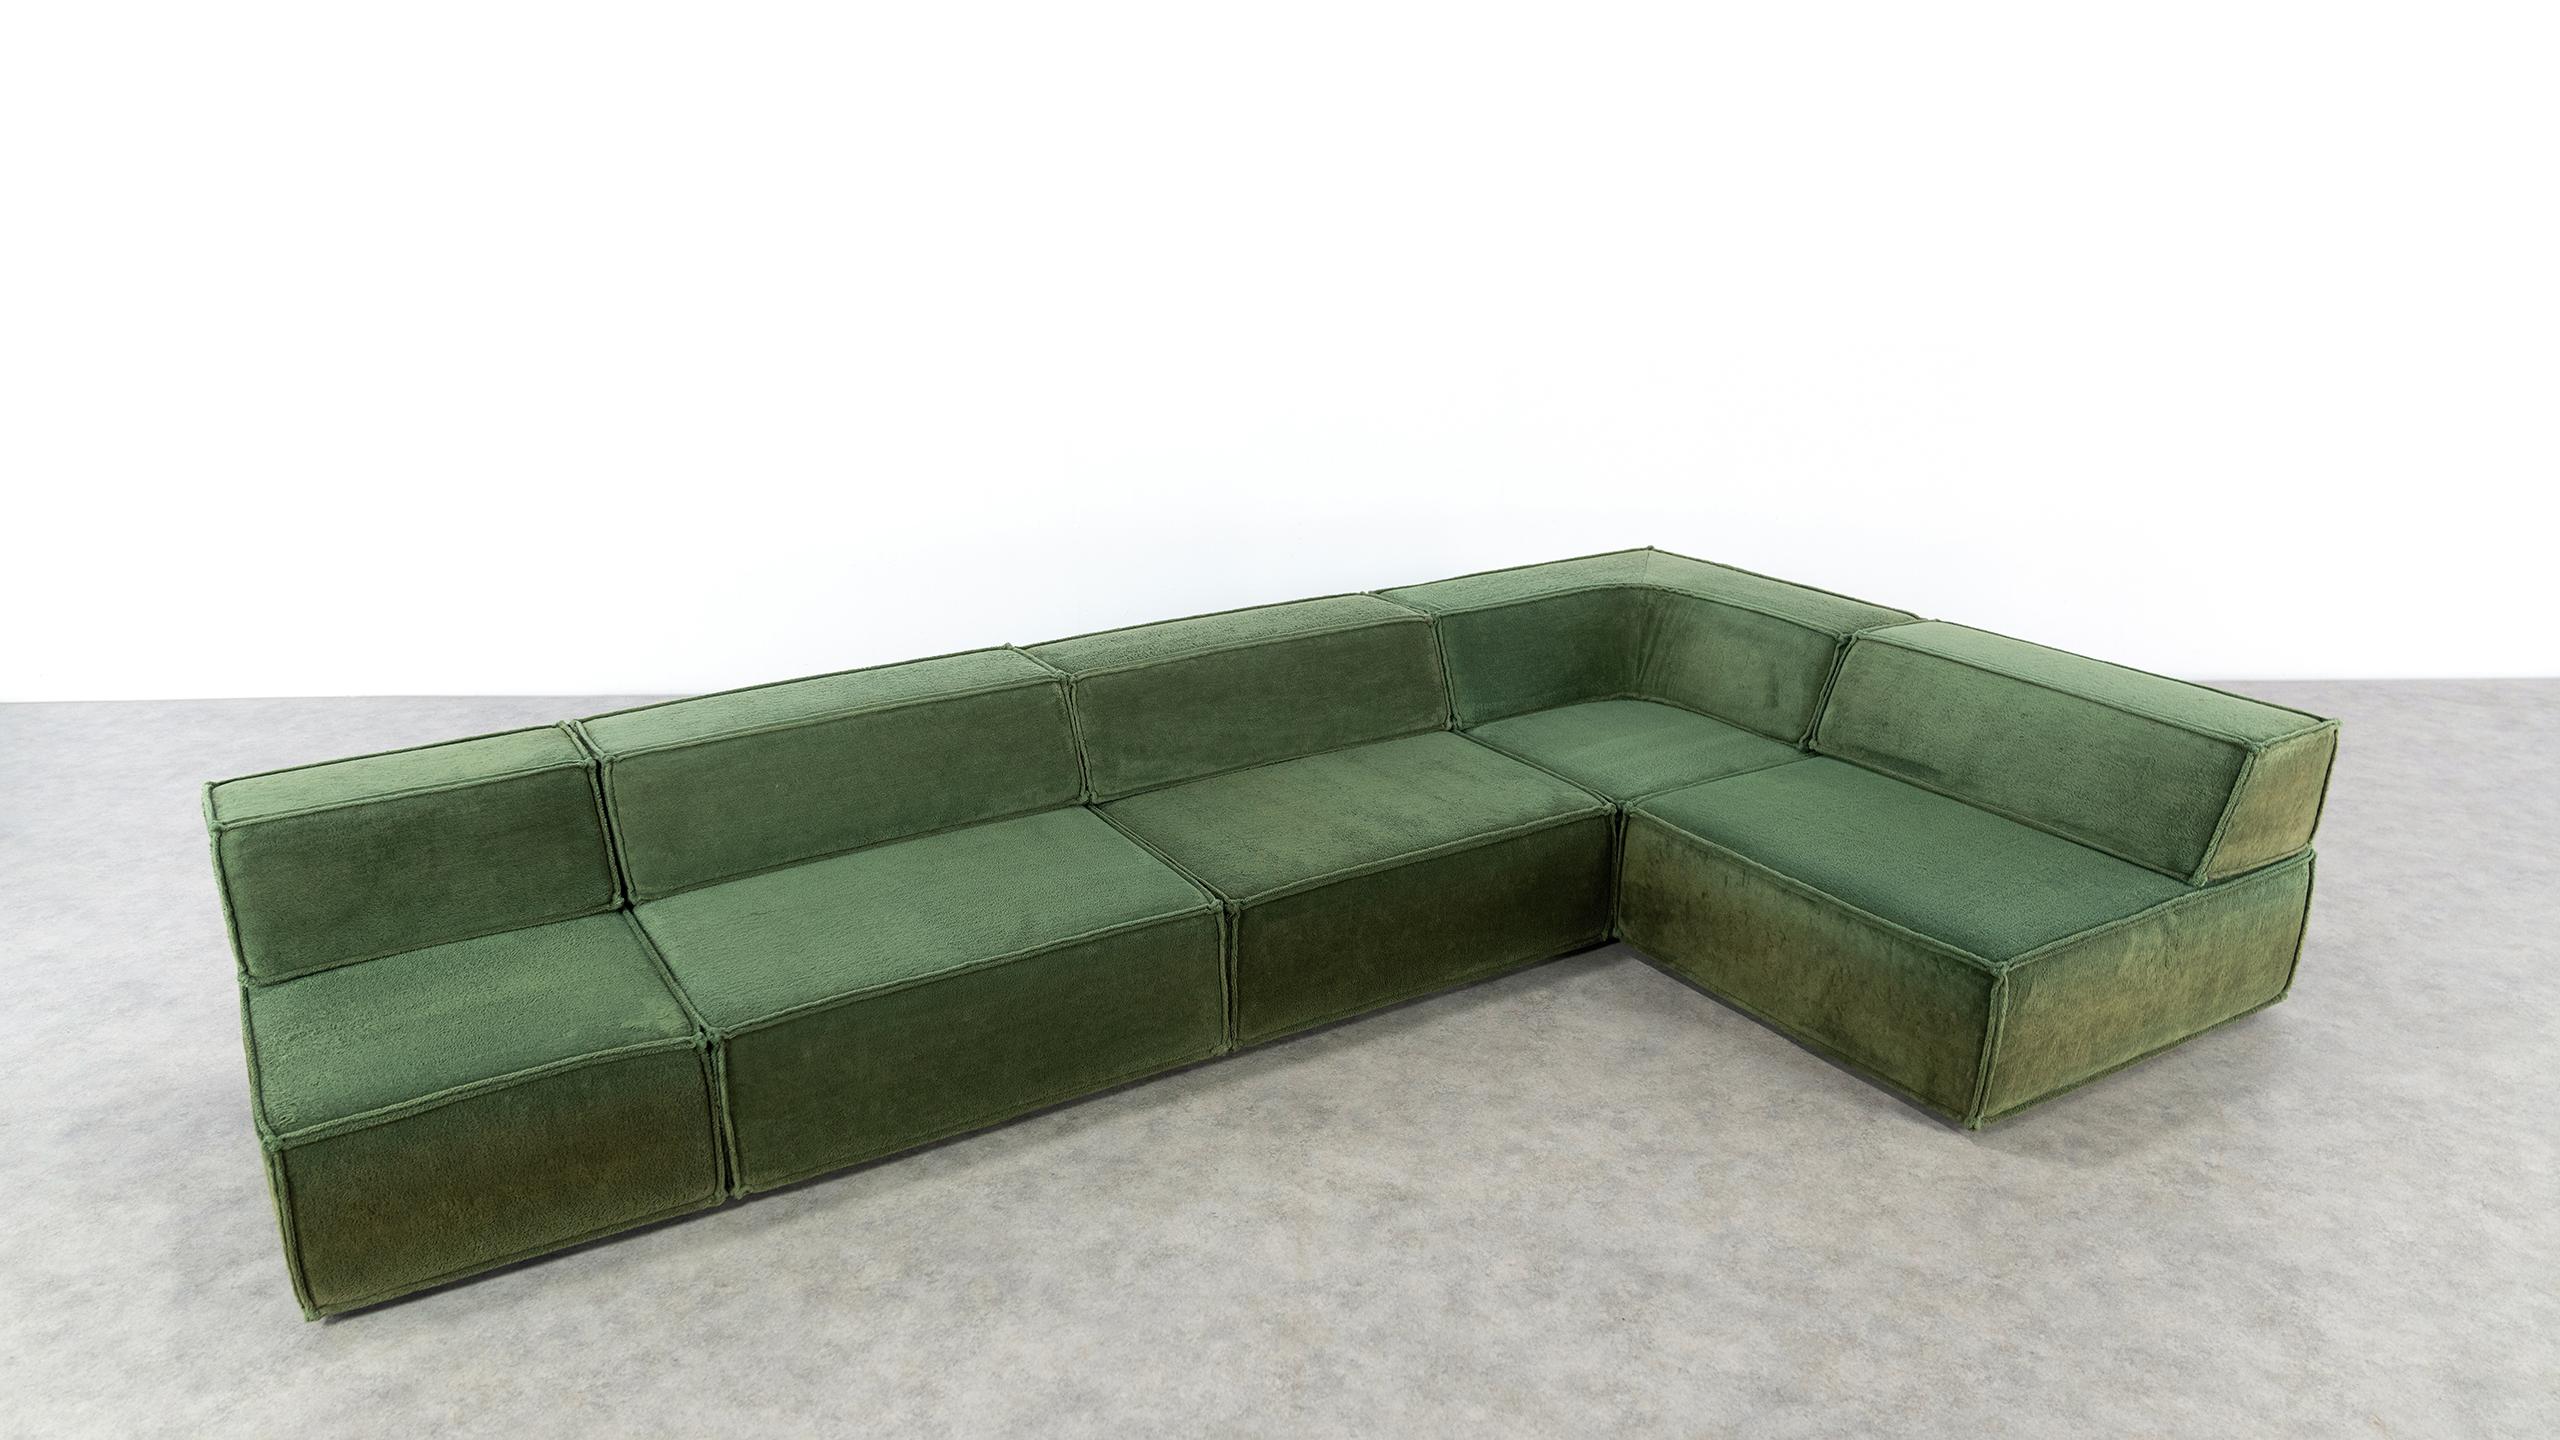 COR Trio Modular Sofa, Giant Landscape in Green, 1972 by Team Form AG, Swiss 10